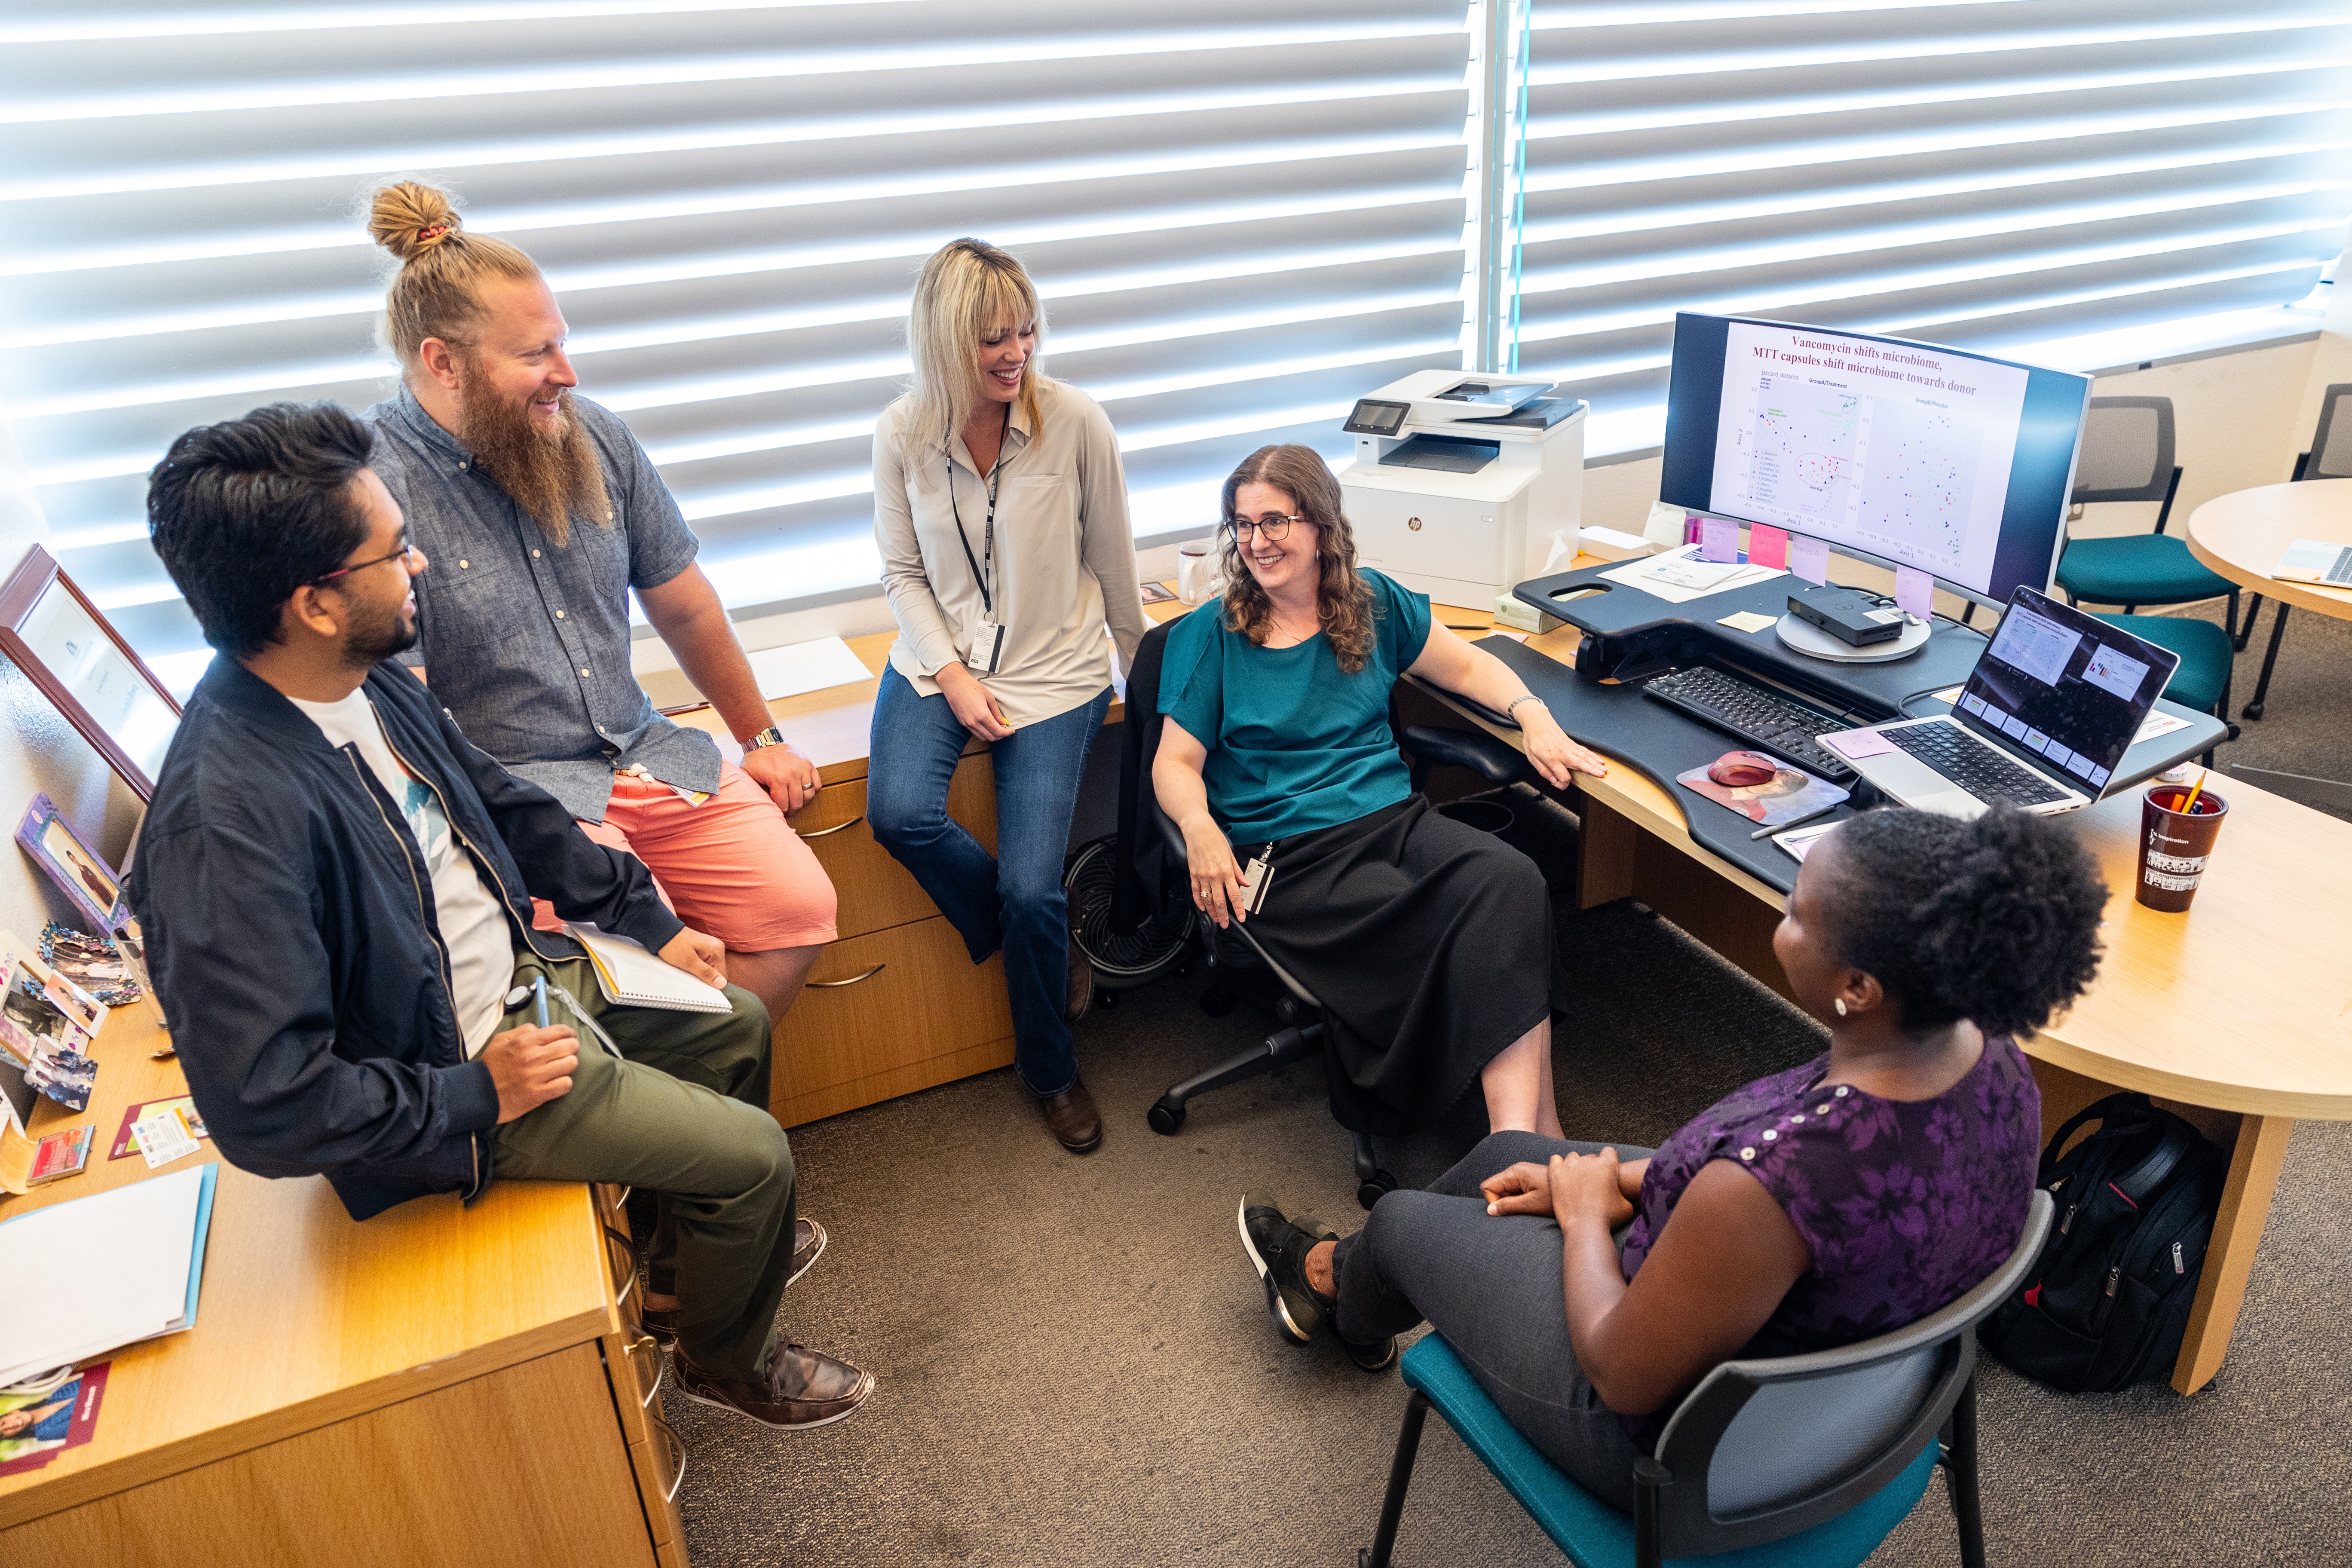 Dr. Rosa Krajmalnik-Brown with postdoctoral research scholar, Evelyn Takyi, Post-doctoral fellow Khemlal Nirmalkar, PhD student Andrew Bellinghiere, and PhD student Rylee Close